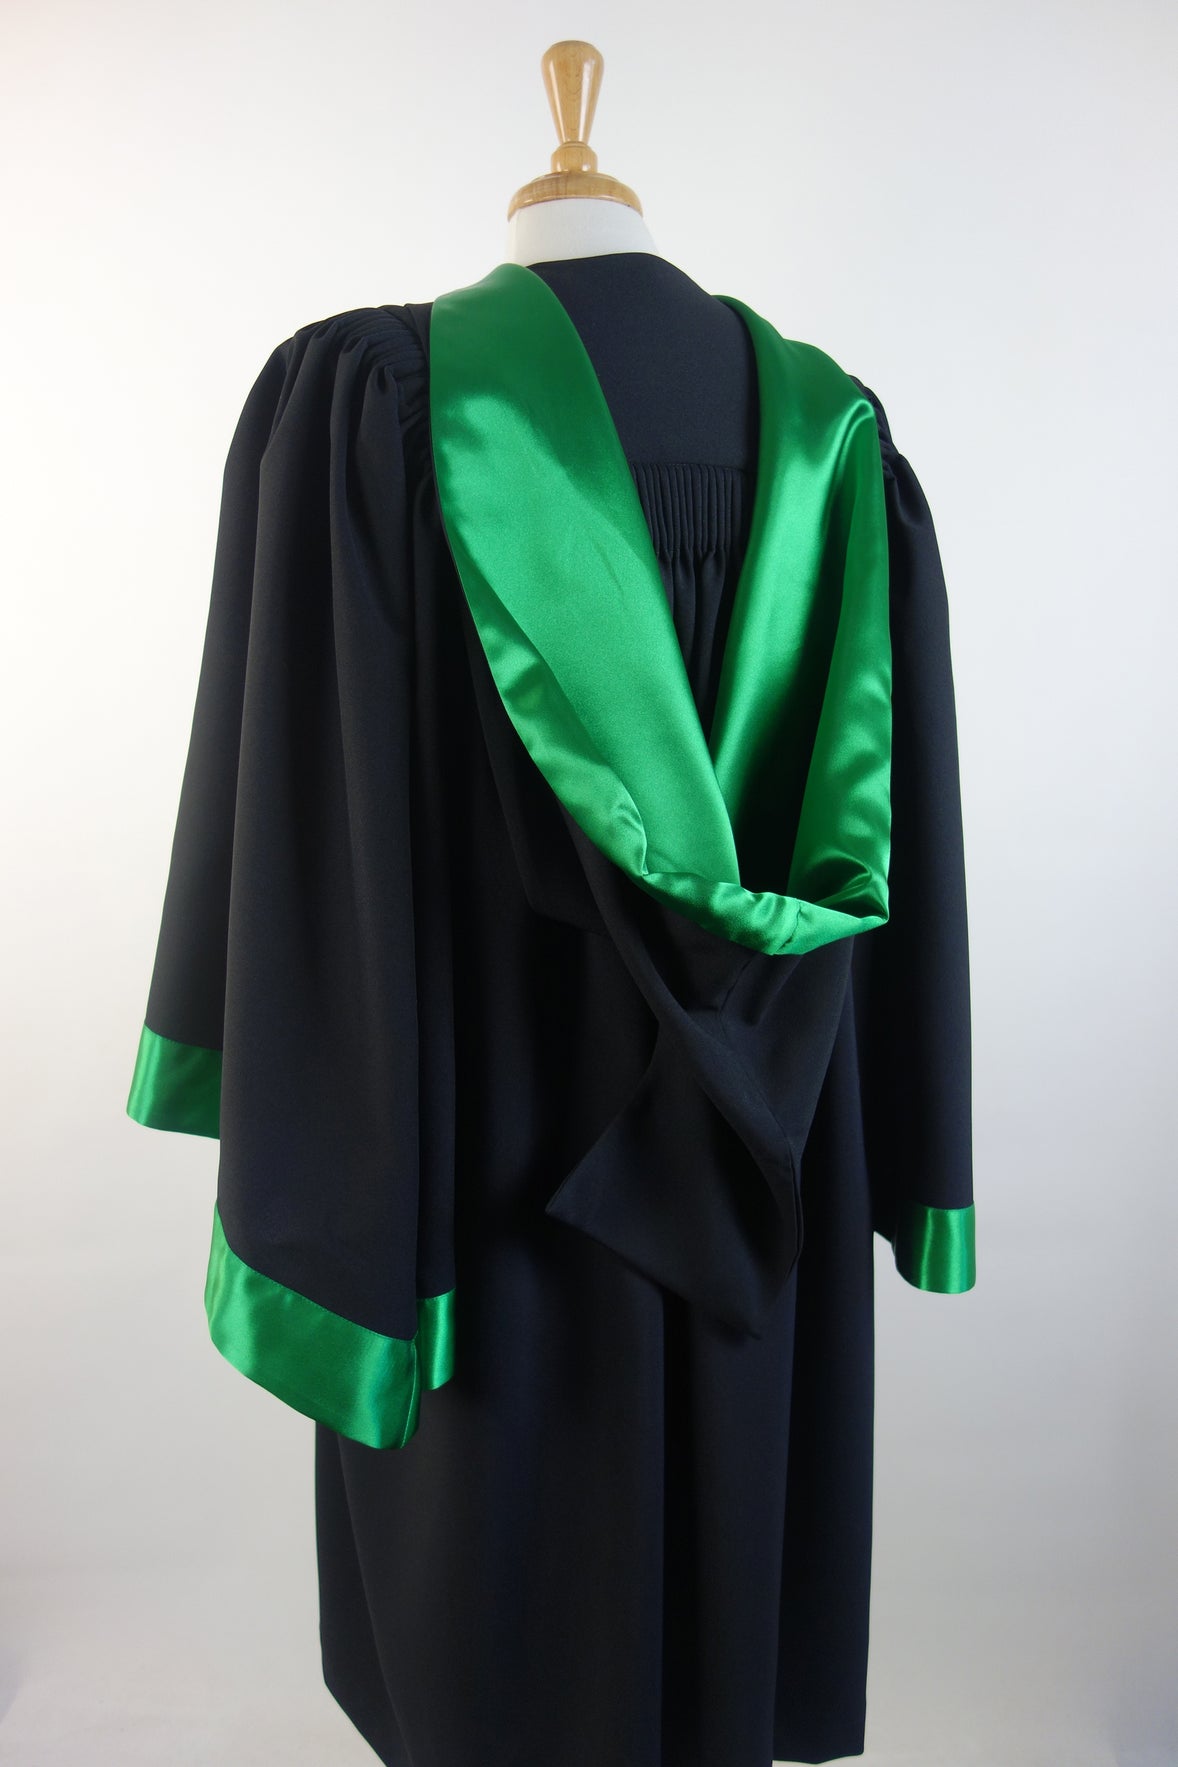 University of Divinity Doctor of Ministry Studies Graduation Gown Set - Gown, Hood and Bonnet